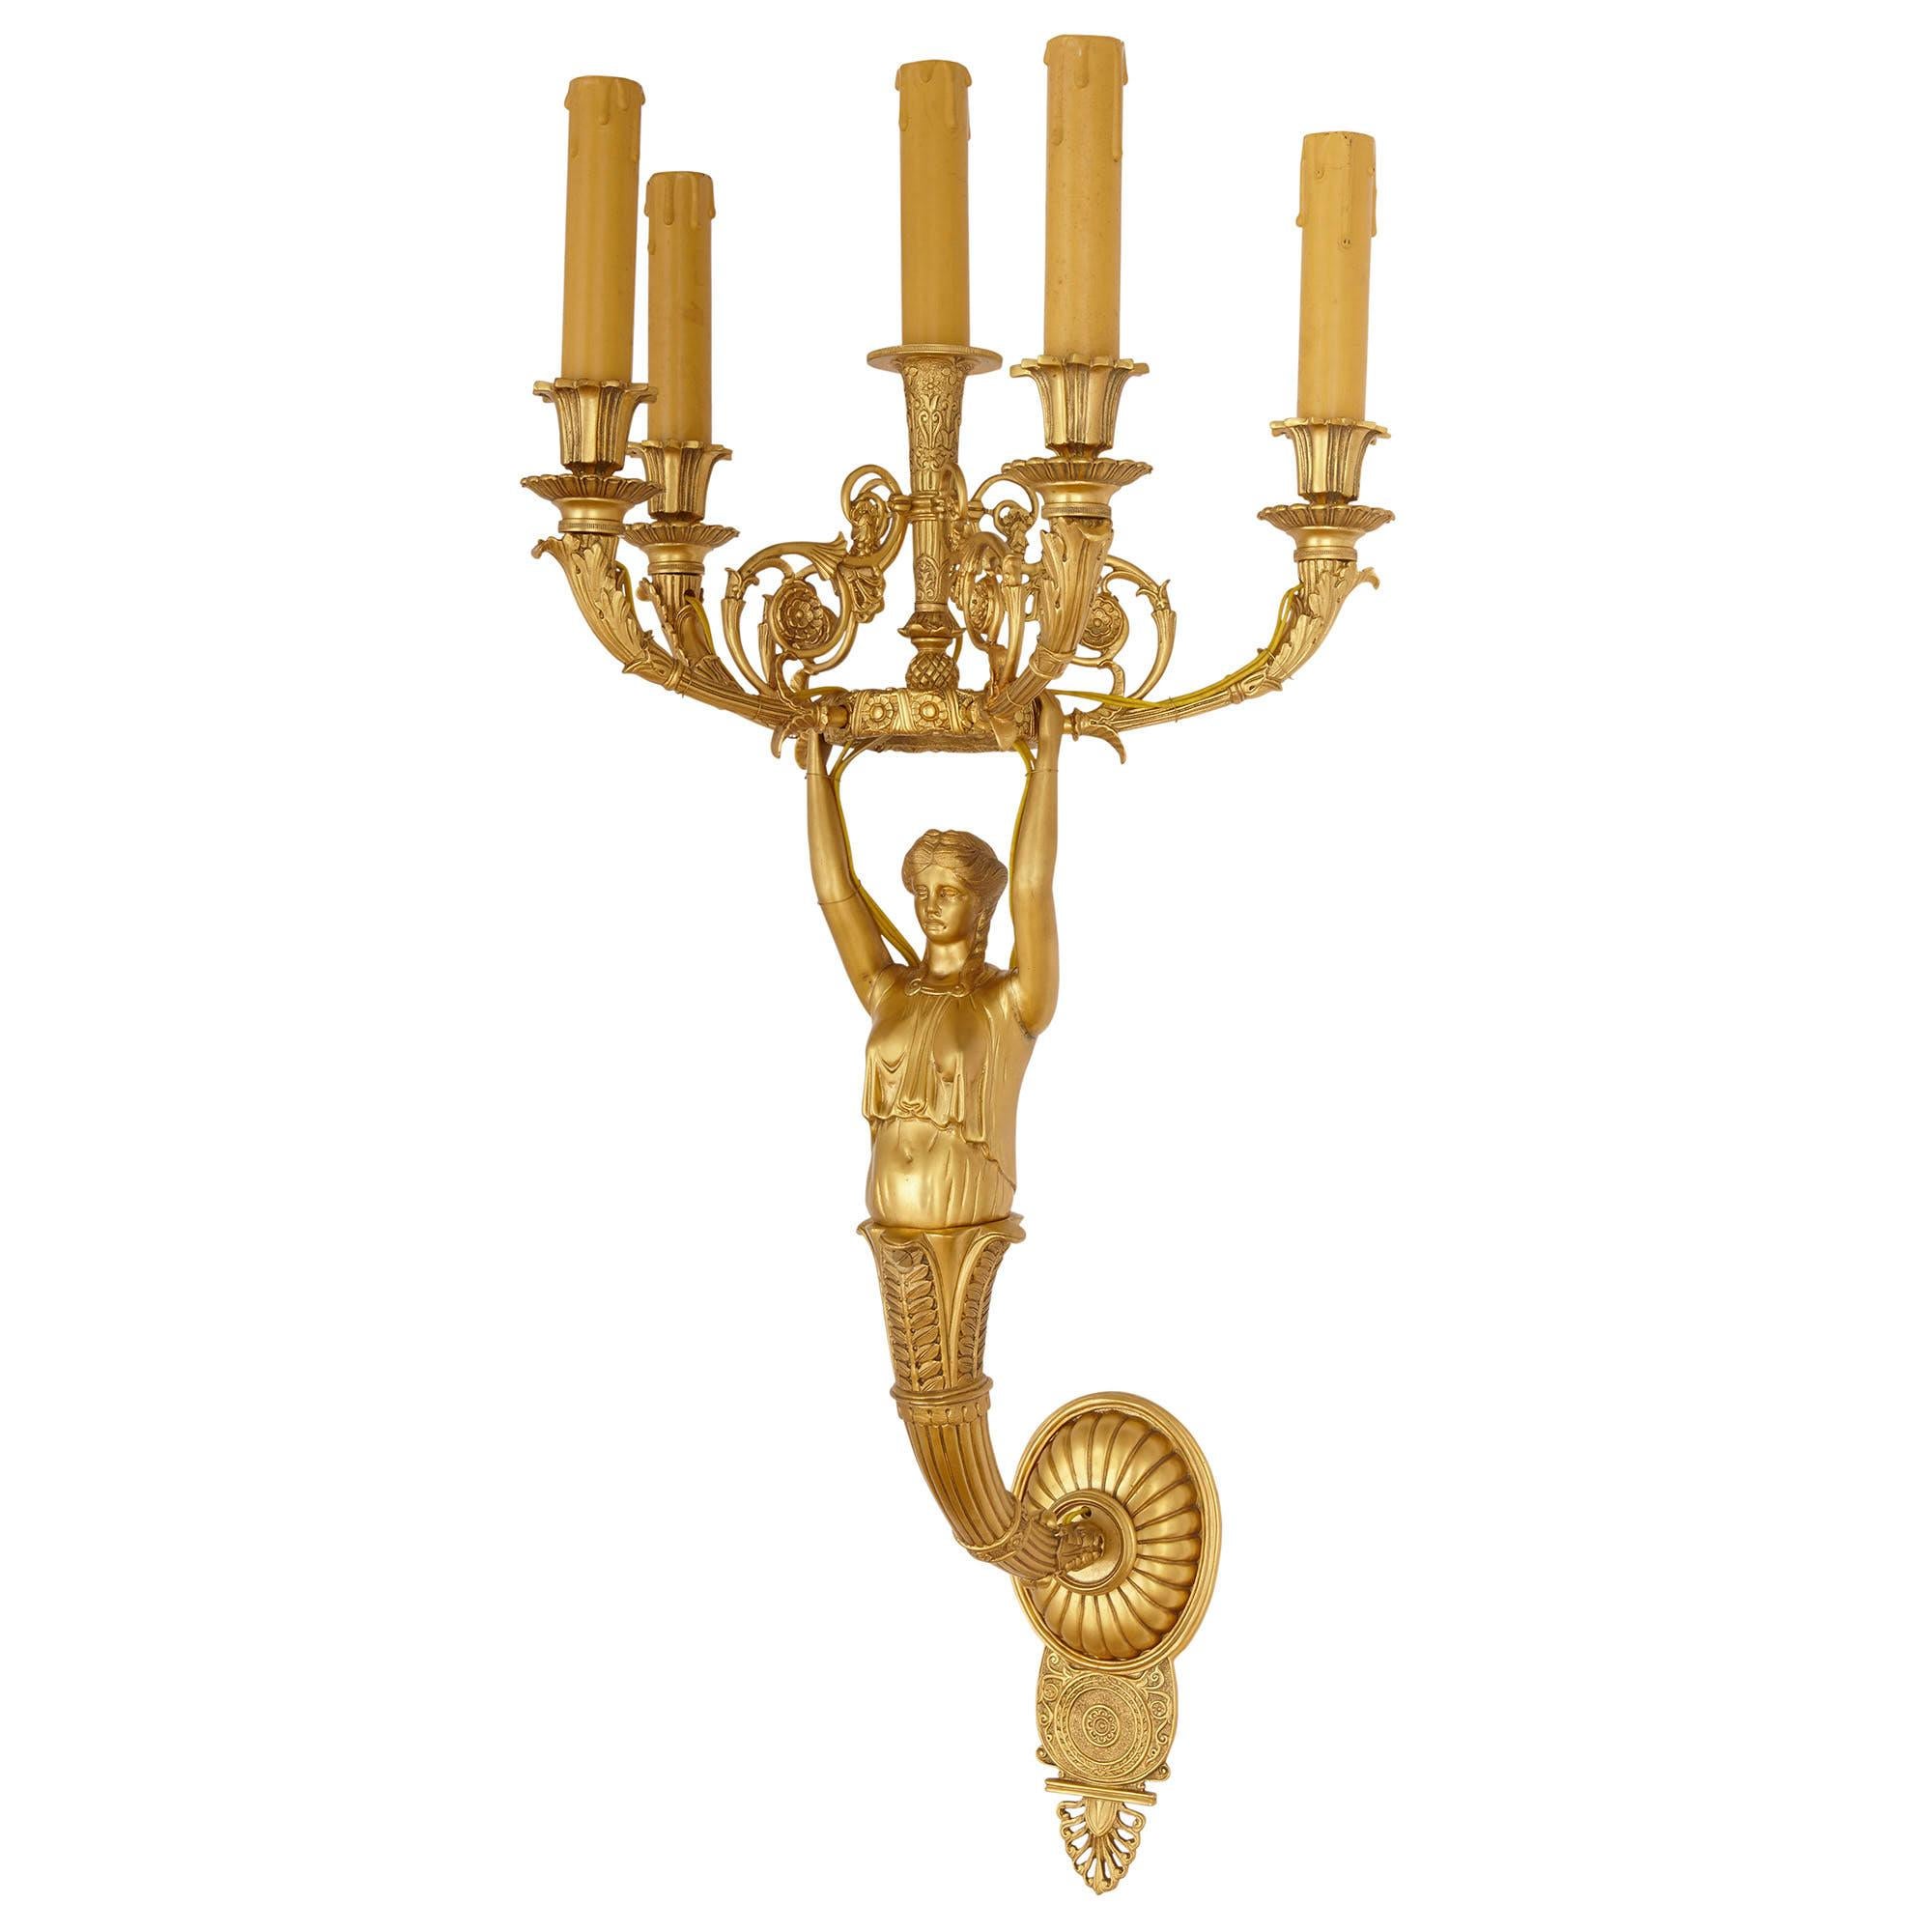 Pair of French Empire style gilt bronze sconces
French, 20th Century
Measures: Height 88cm, width 38cm, depth 35cm

This elegant pair of sconces is wrought from gilt bronze in the French Empire style. Each sconce features five scrolled branches,